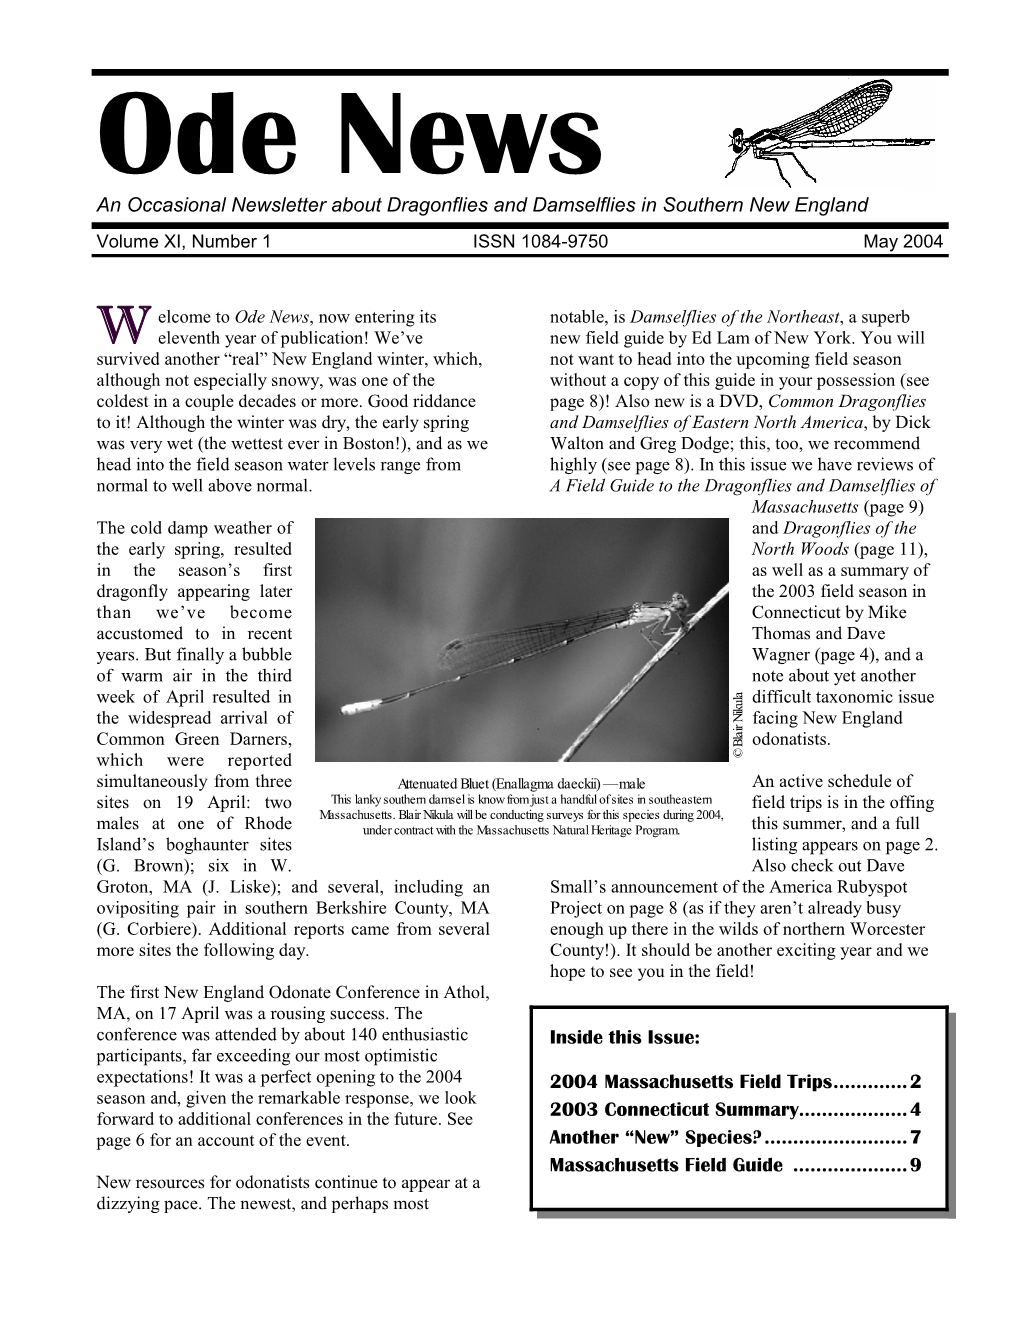 An Occasional Newsletter About Dragonflies and Damselflies in Southern New England Volume XI, Number 1 ISSN 1084-9750 May 2004